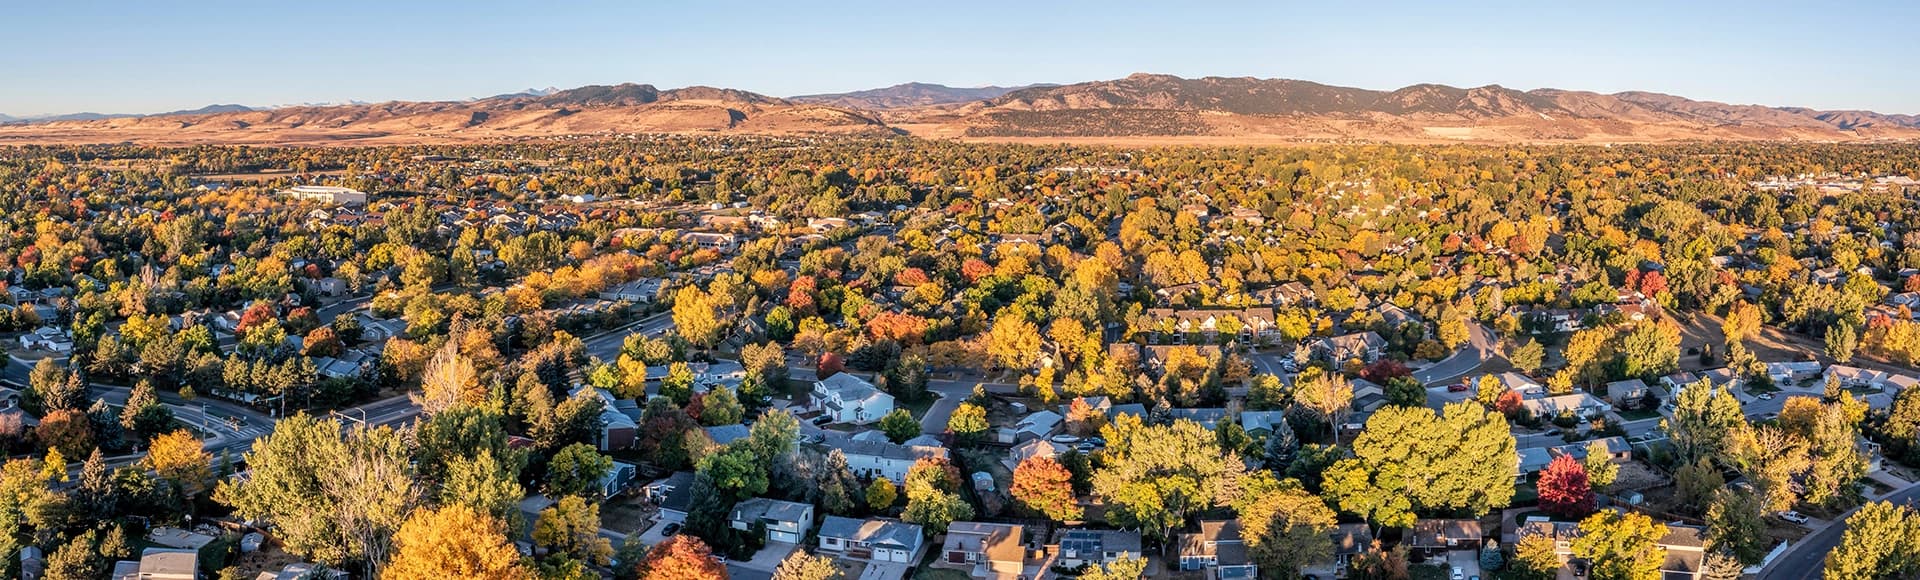 City of Fort Collins (residential area) and Front Range of Rocky Mountains in northern Colorado, aerial panorama in fall scenery